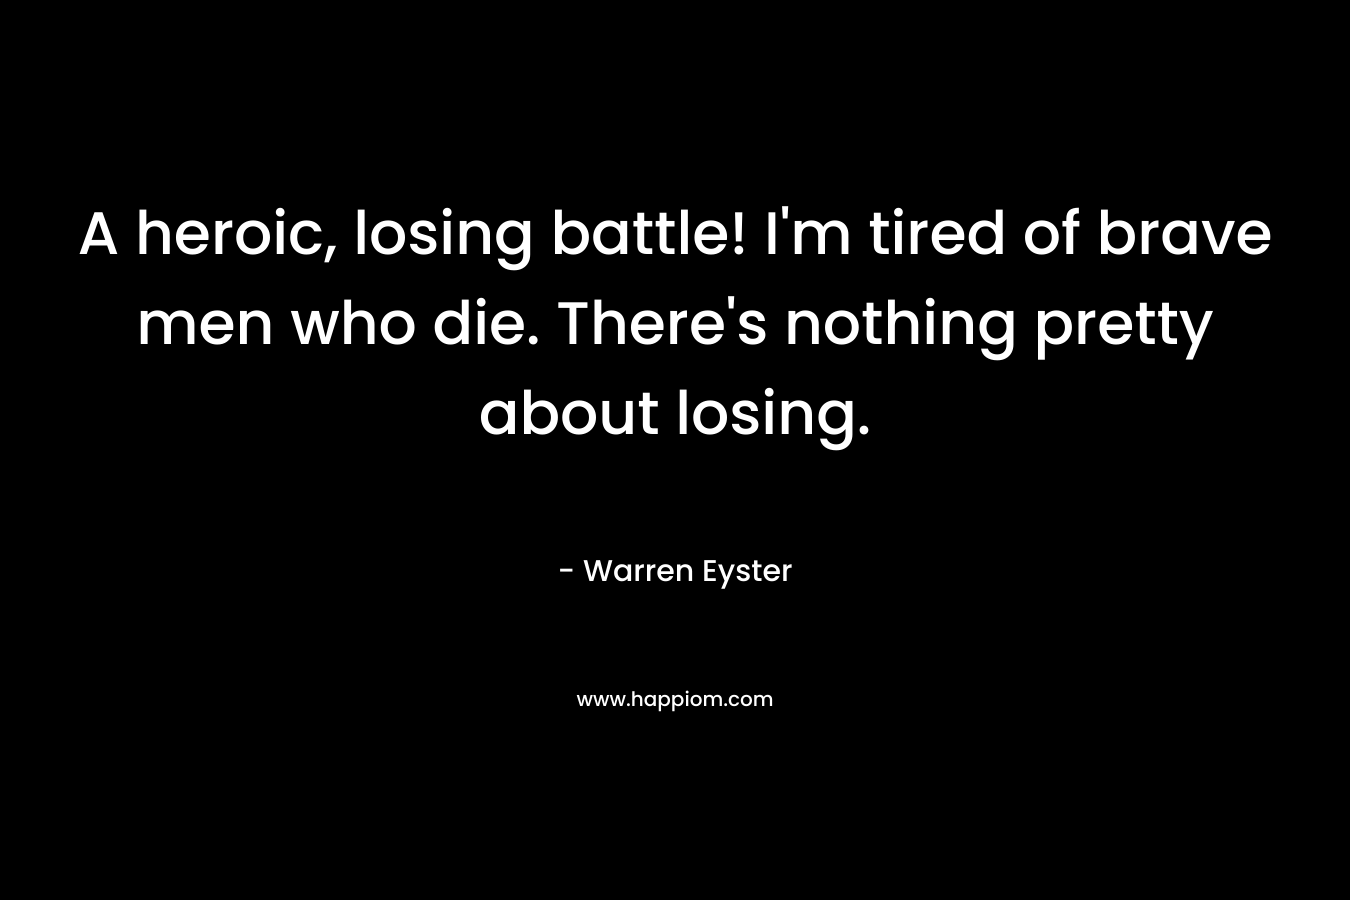 A heroic, losing battle! I’m tired of brave men who die. There’s nothing pretty about losing. – Warren Eyster